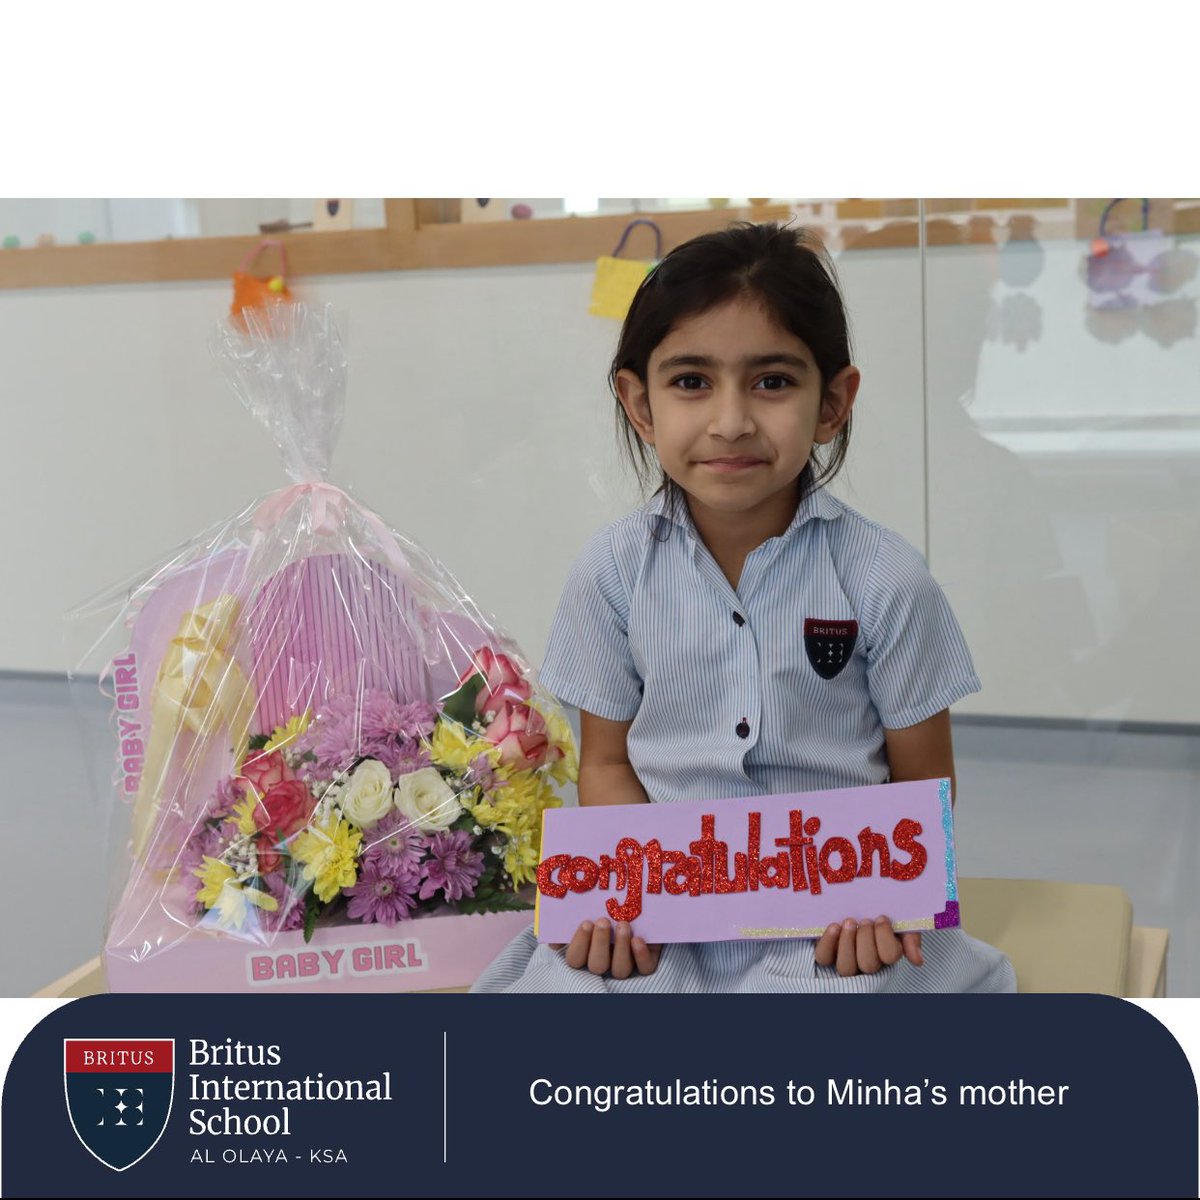 Minha is excited to welcome her baby sister. On behalf of the entire BISO family, we extend our warmest congratulations to Minha’s mother on the birth of her beautiful baby girl.

#riyadhschools #admissionsopen